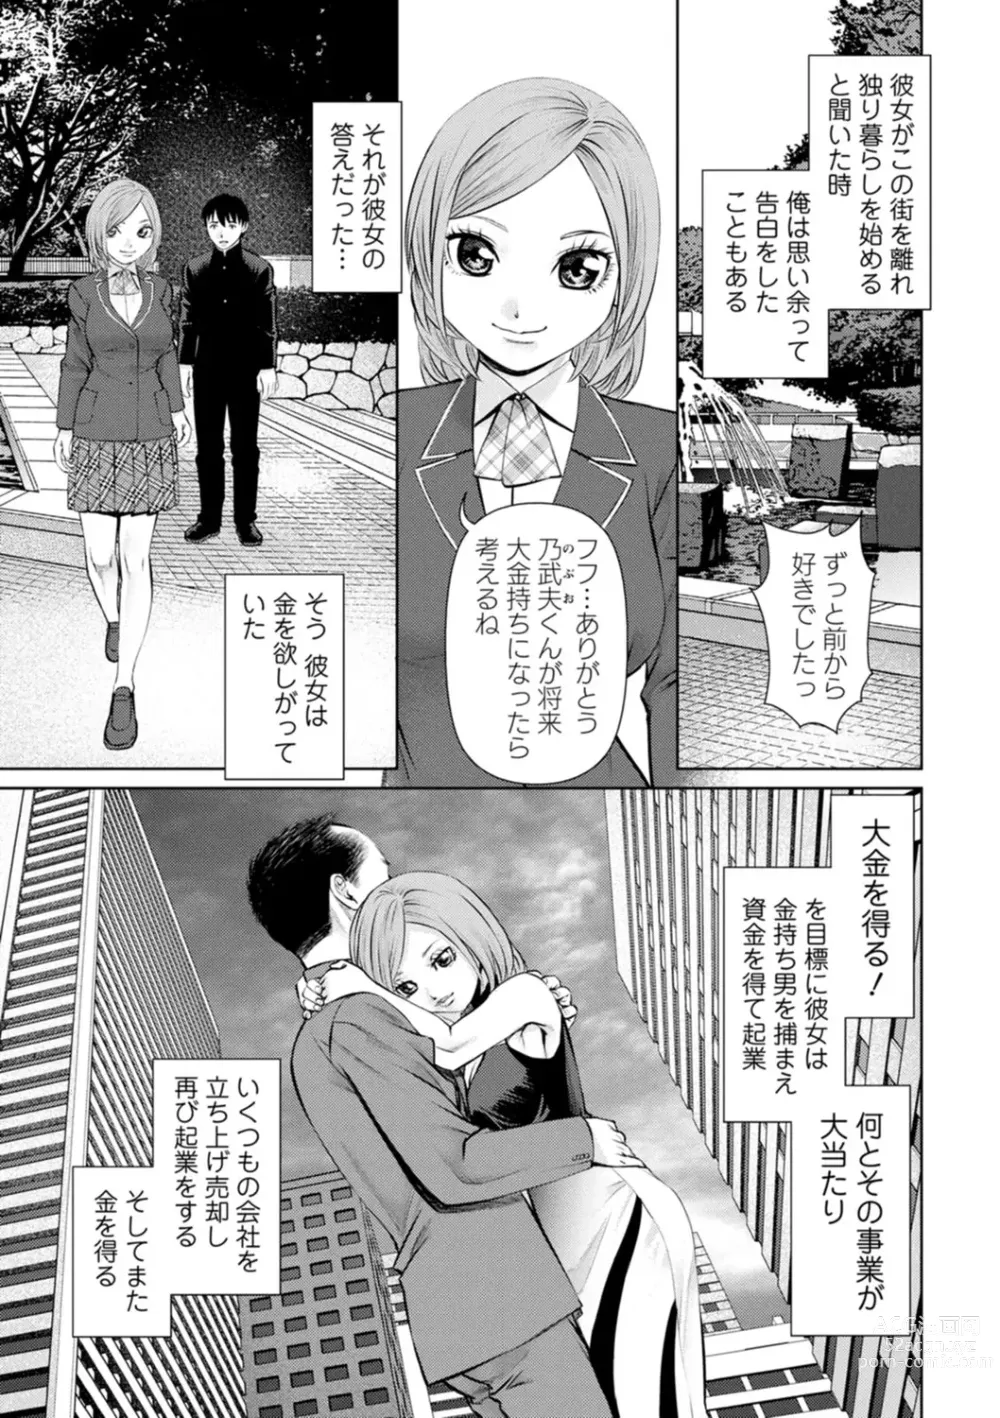 Page 7 of manga Kimi to no LOVE Lesson